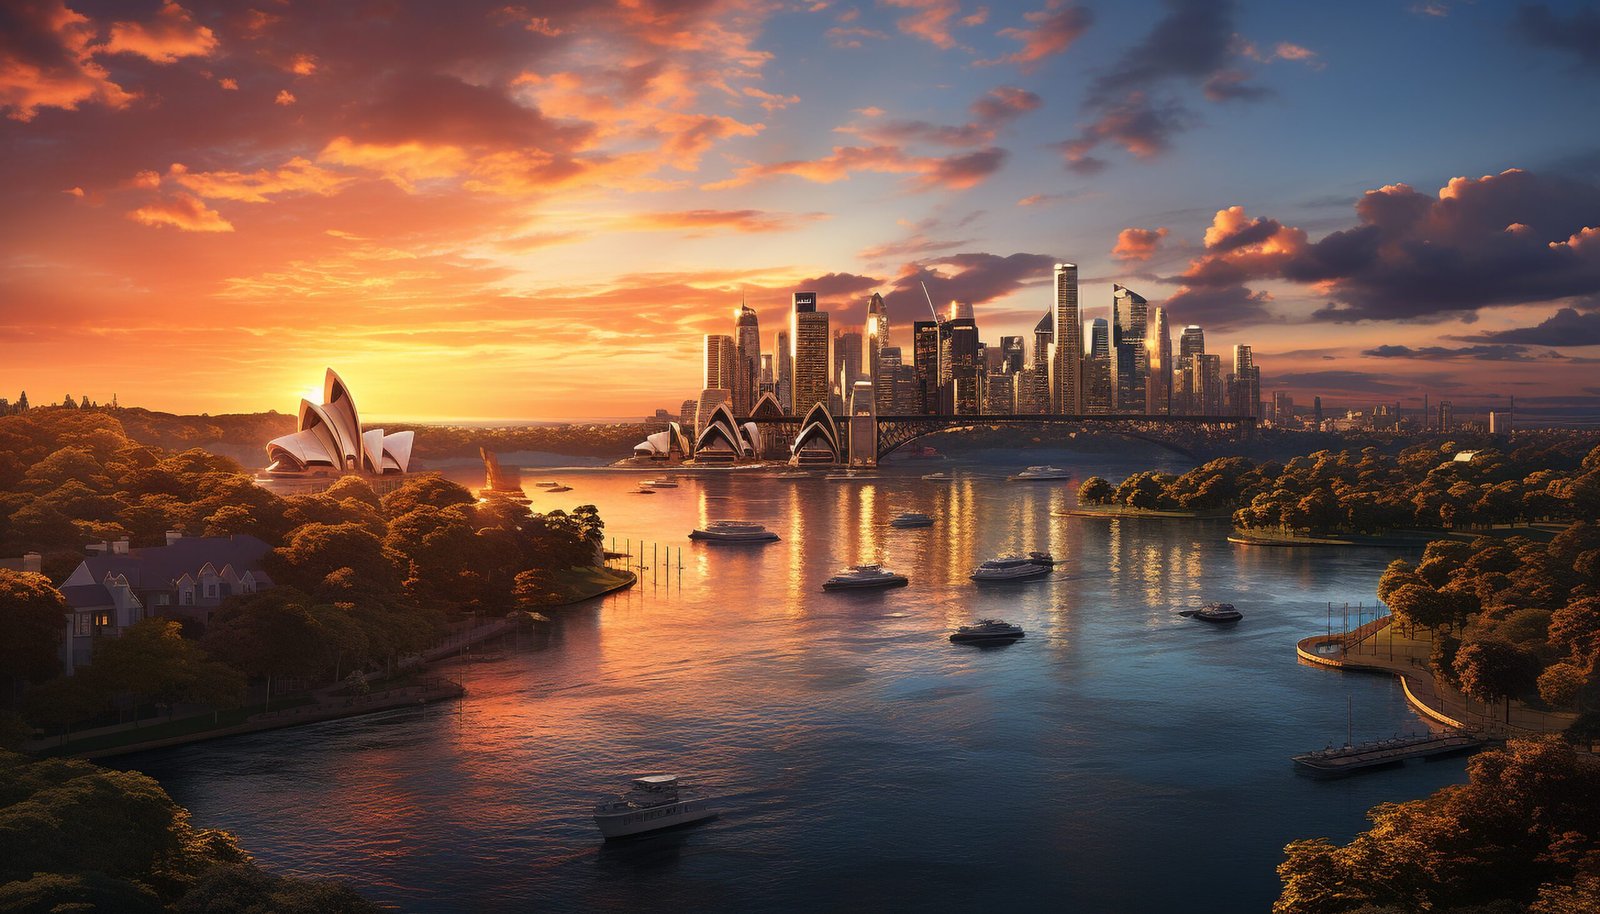 Cityscape of famous financial district at dusk, reflecting on waterfront generated by artificial intelligence